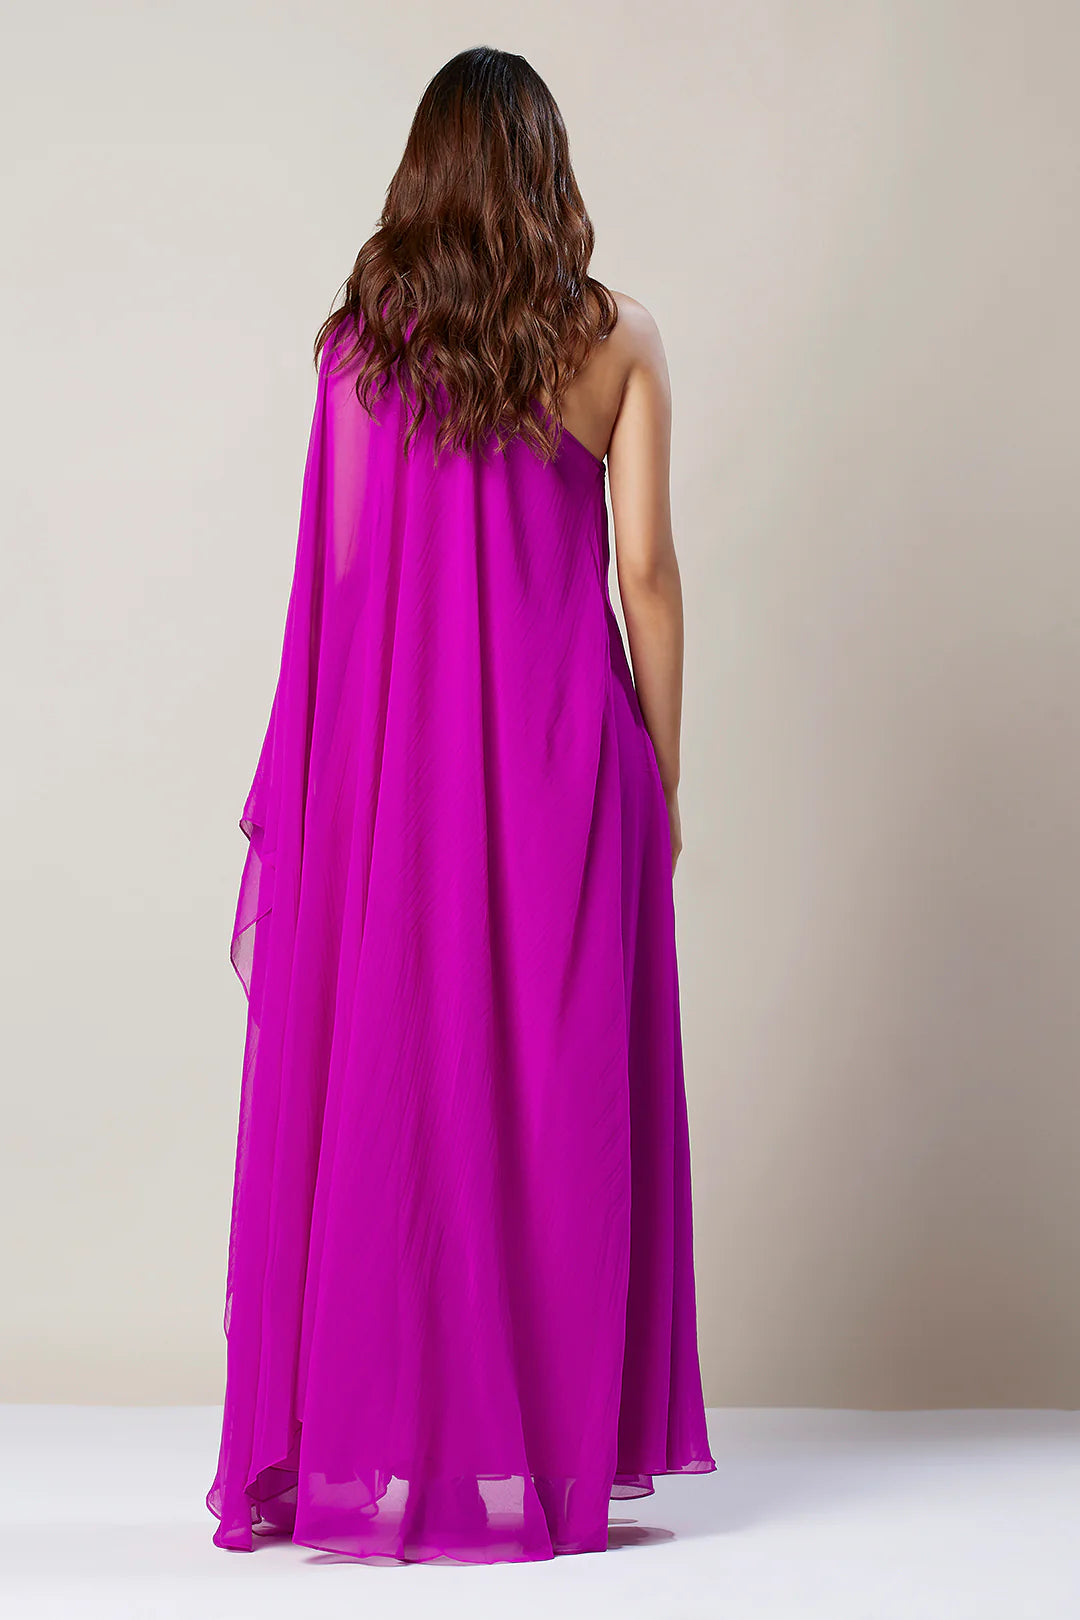 Image of Upgrade your evening wardrobe with the One Shoulder Maxi Dress. Its single-shoulder design is modern yet timeless, while the maxi length gives you enough coverage for any occasion. Perfect for creating a chic and sophisticated look. From savoirfashions.com